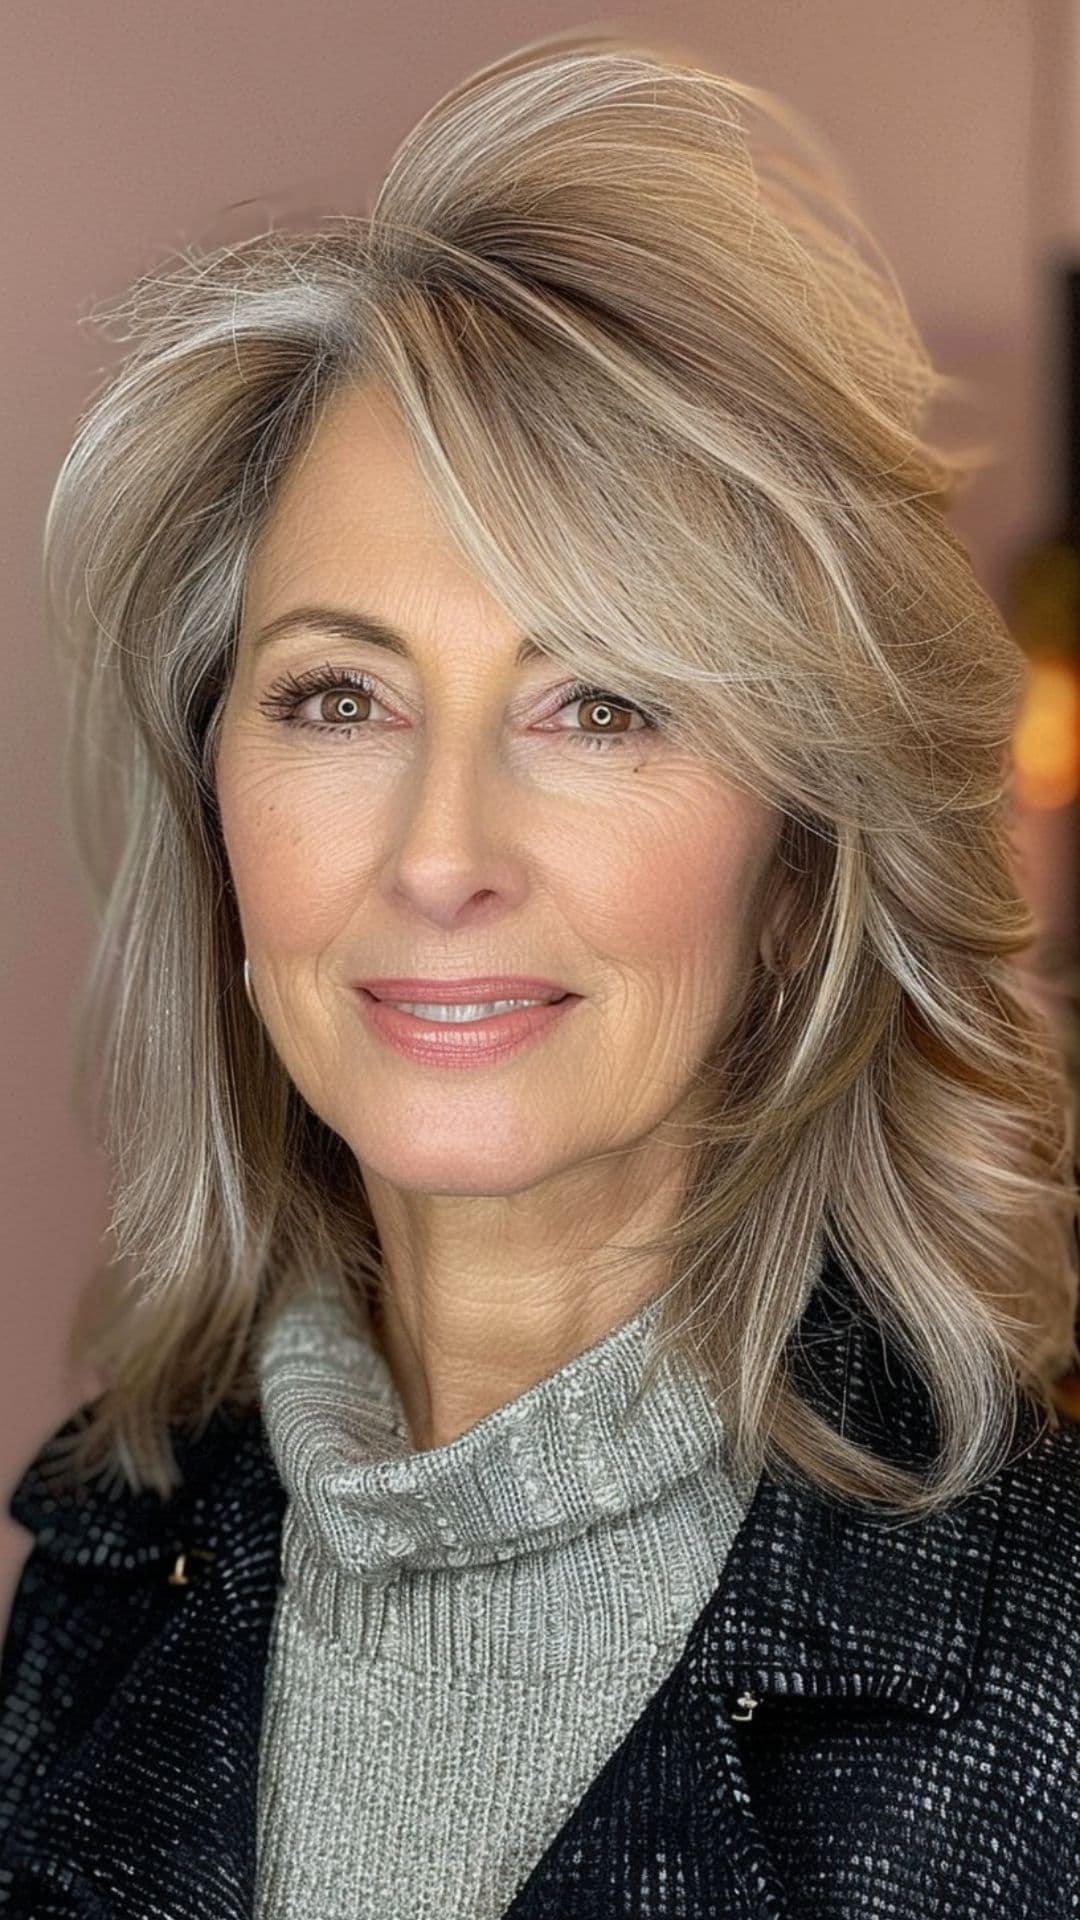 An older woman modelling a side-swept bangs with medium-length hair.